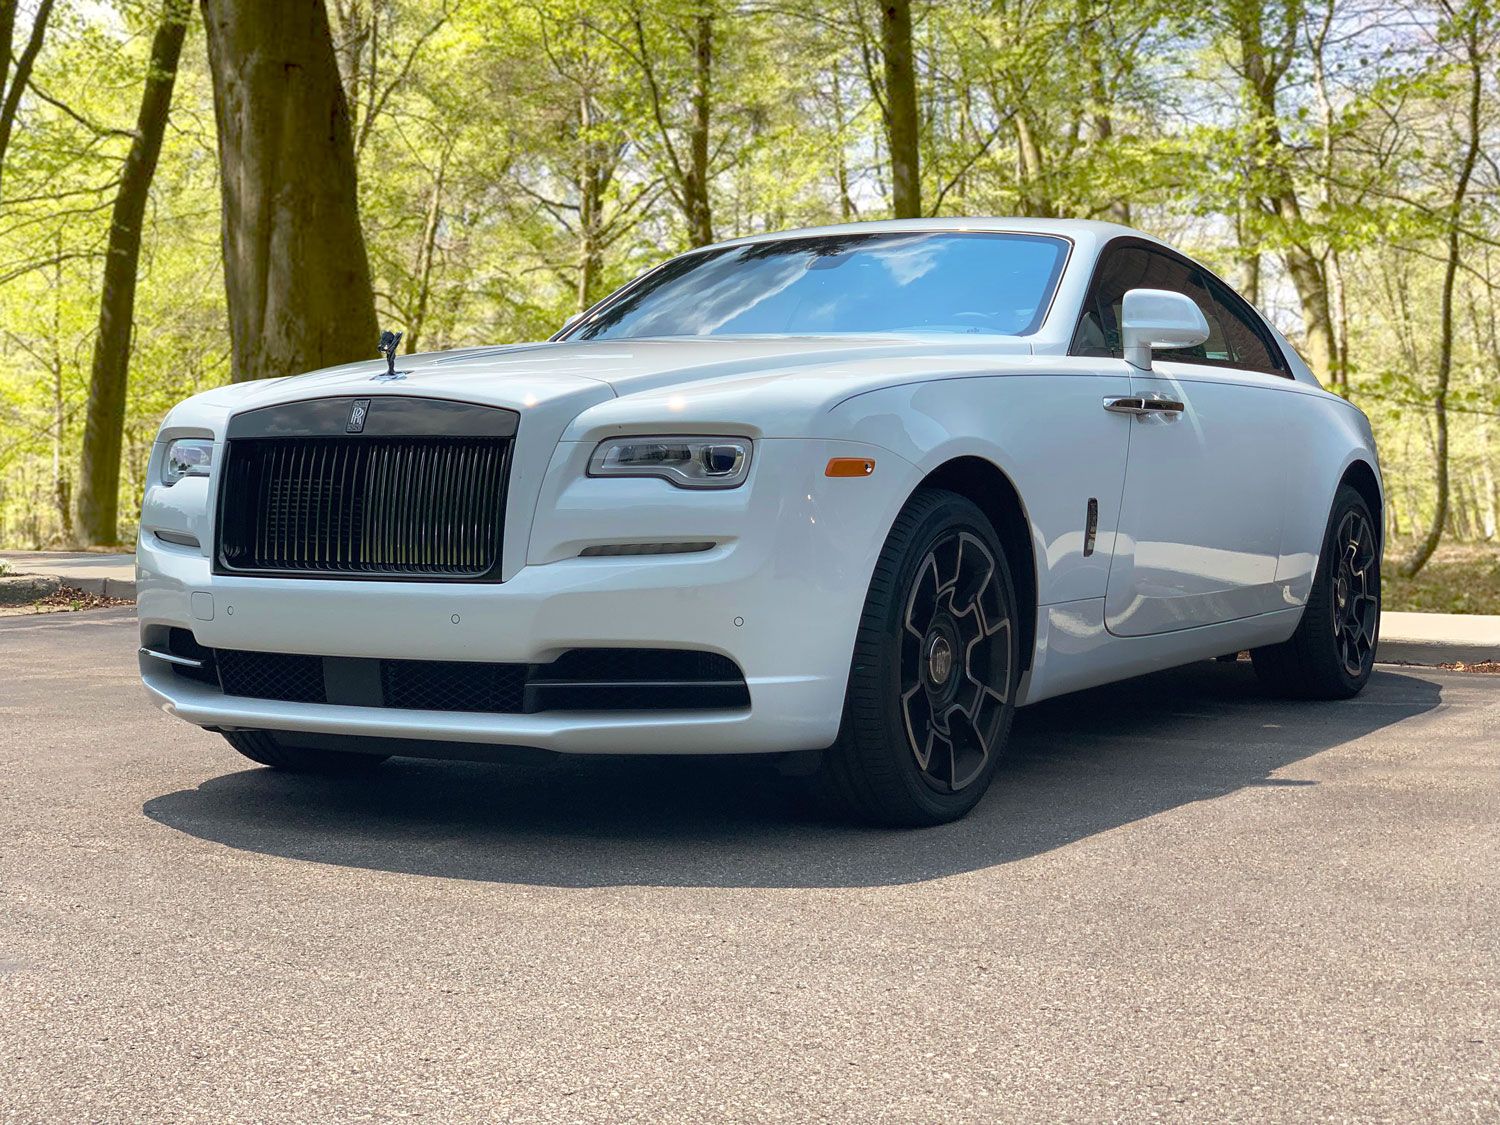 2015 RollsRoyce Wraith Prices Reviews and Photos  MotorTrend